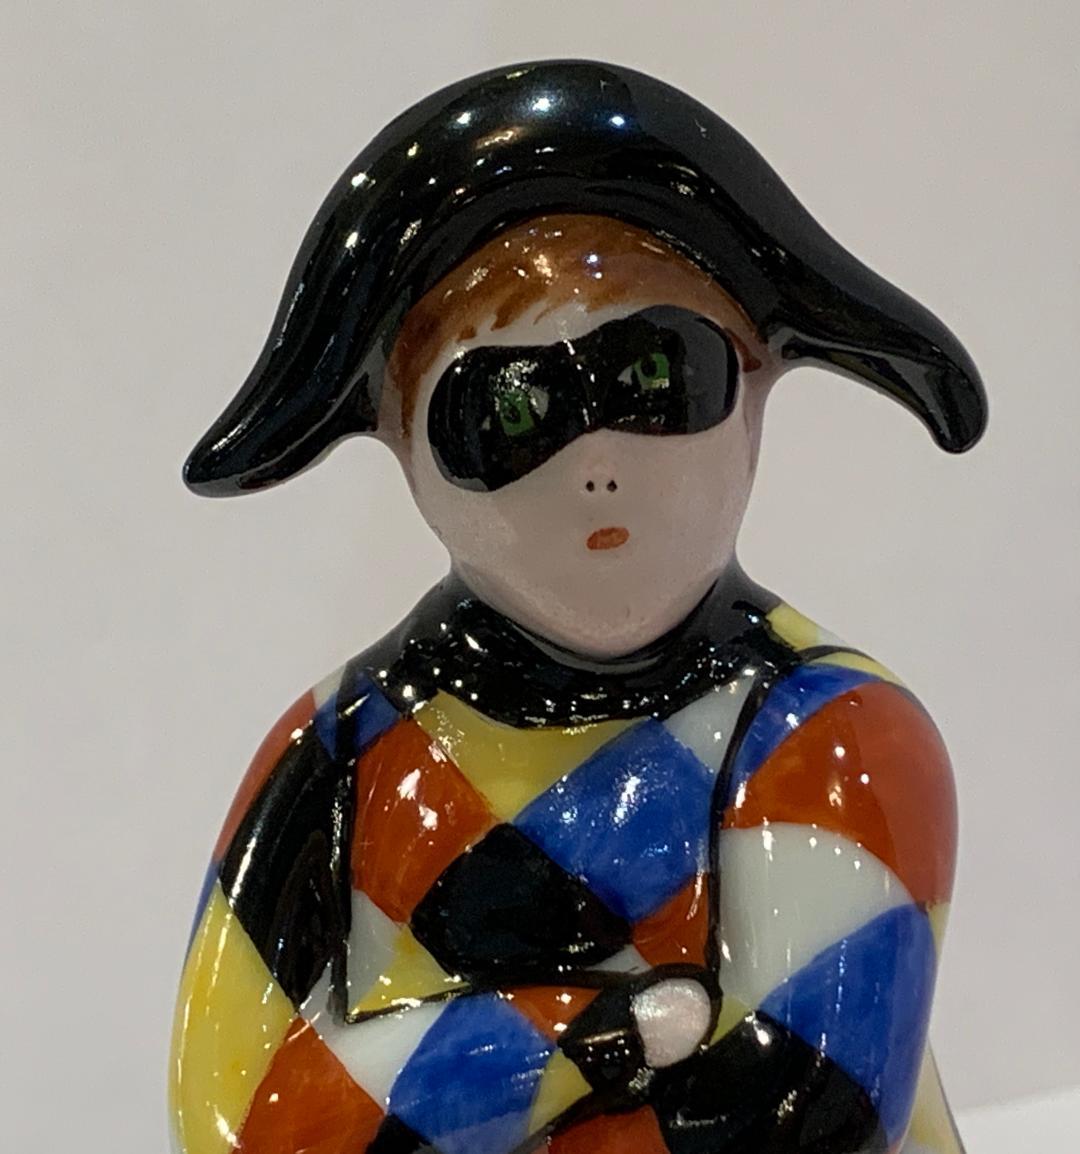 Collectible handmade and finely hand painted estate Limoges porcelain miniature Harlequin or Arlequin shaped polychrome trinket box features a beautifully detailed hand painted exterior and antique gold tone metal fittings with a belt buckle shaped